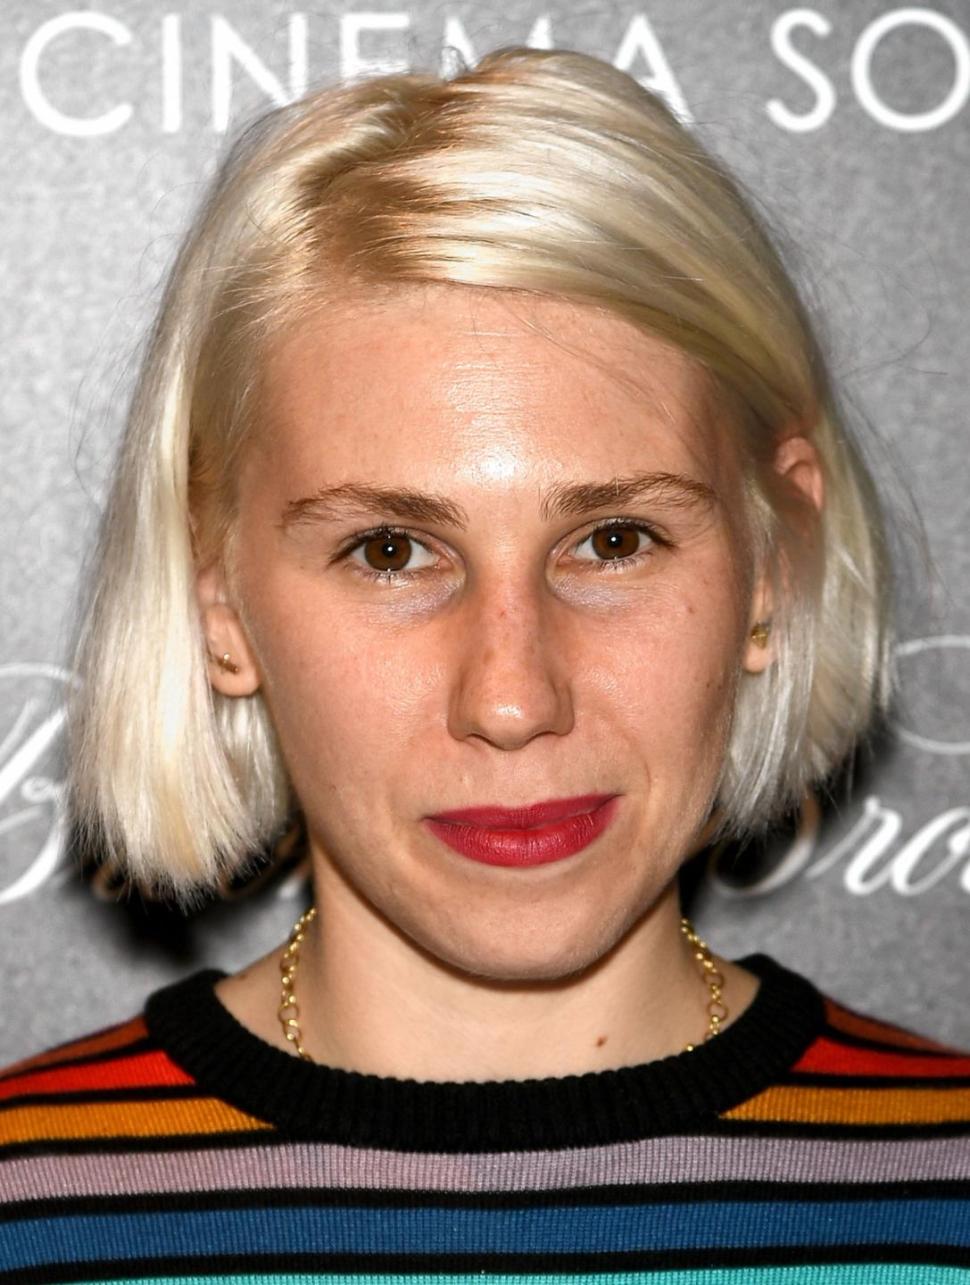 Zosia Mamet is broadening her skills by writing a column for Glamour.